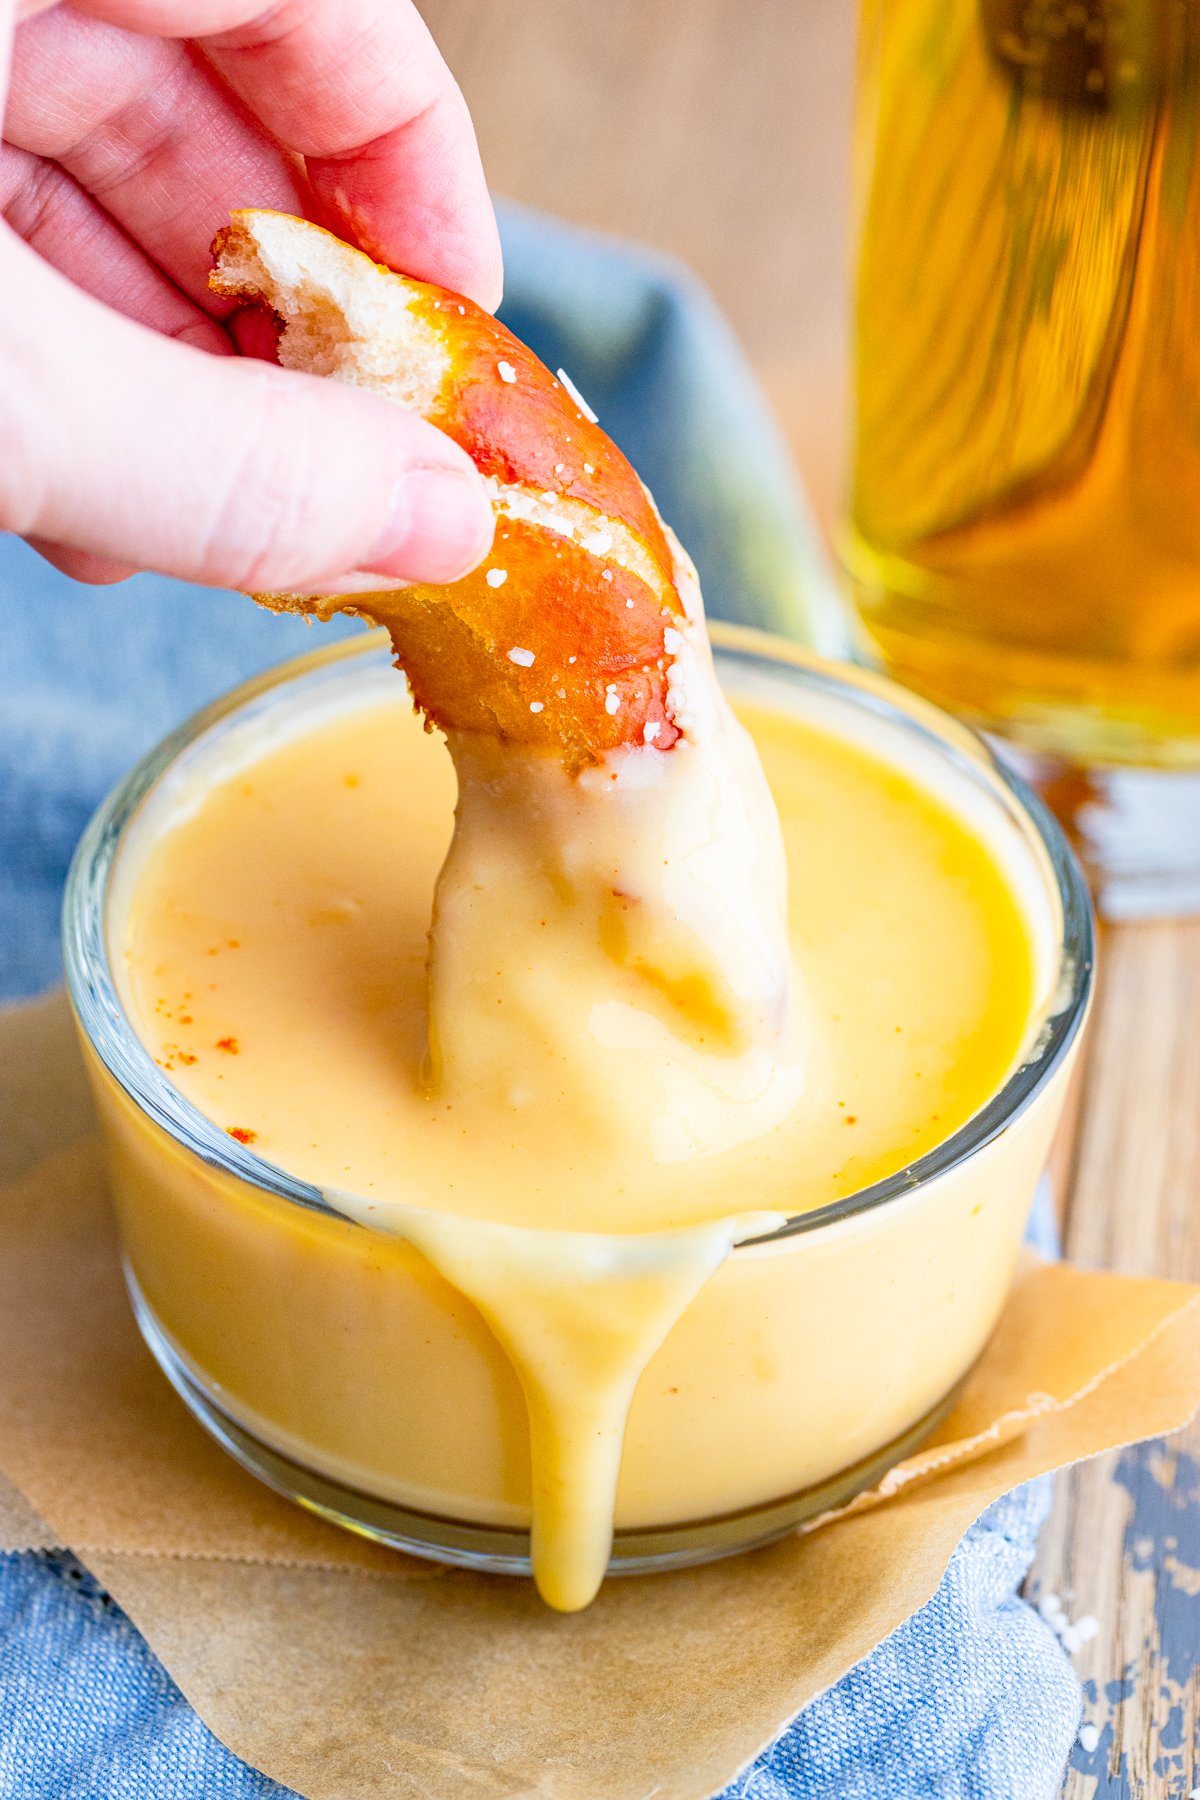 Pretzel pies being dipped into Beer Cheese Dip